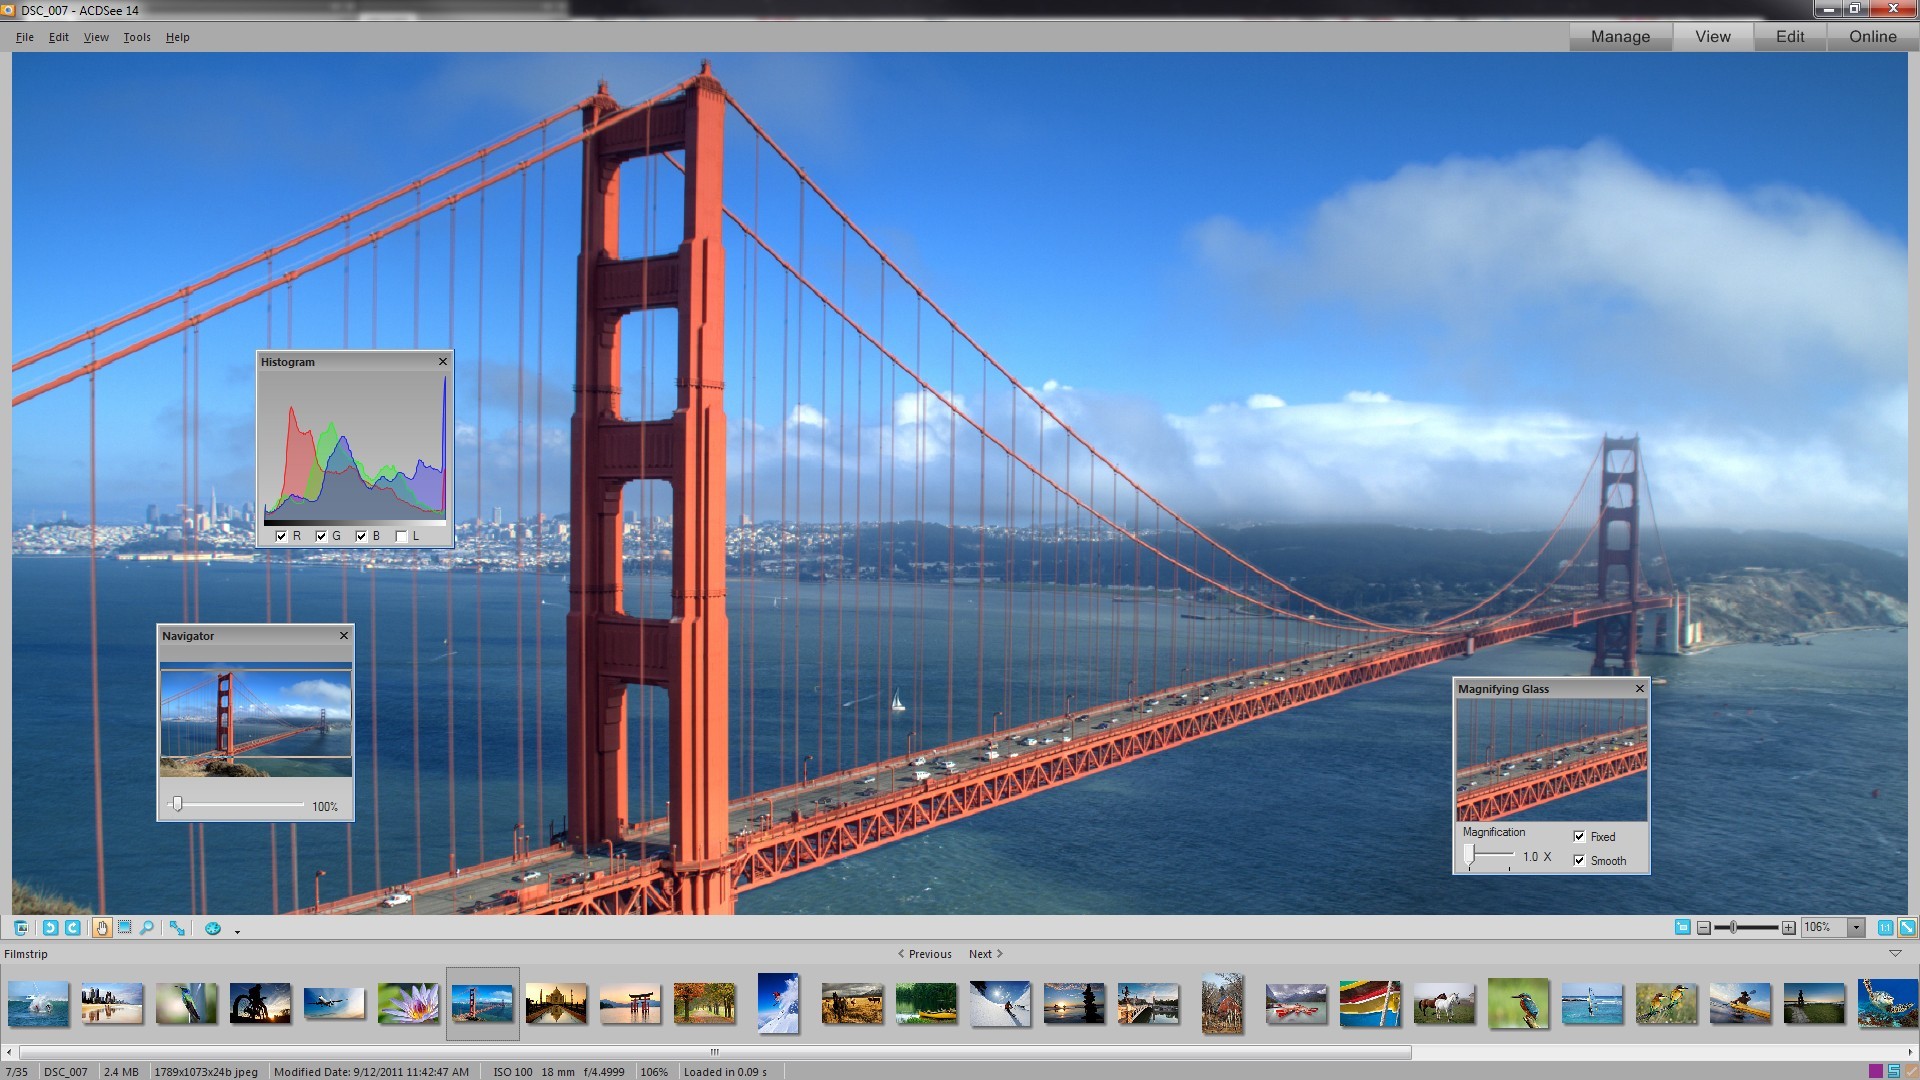 ACDSee Photo Manager 14.0 Build 110